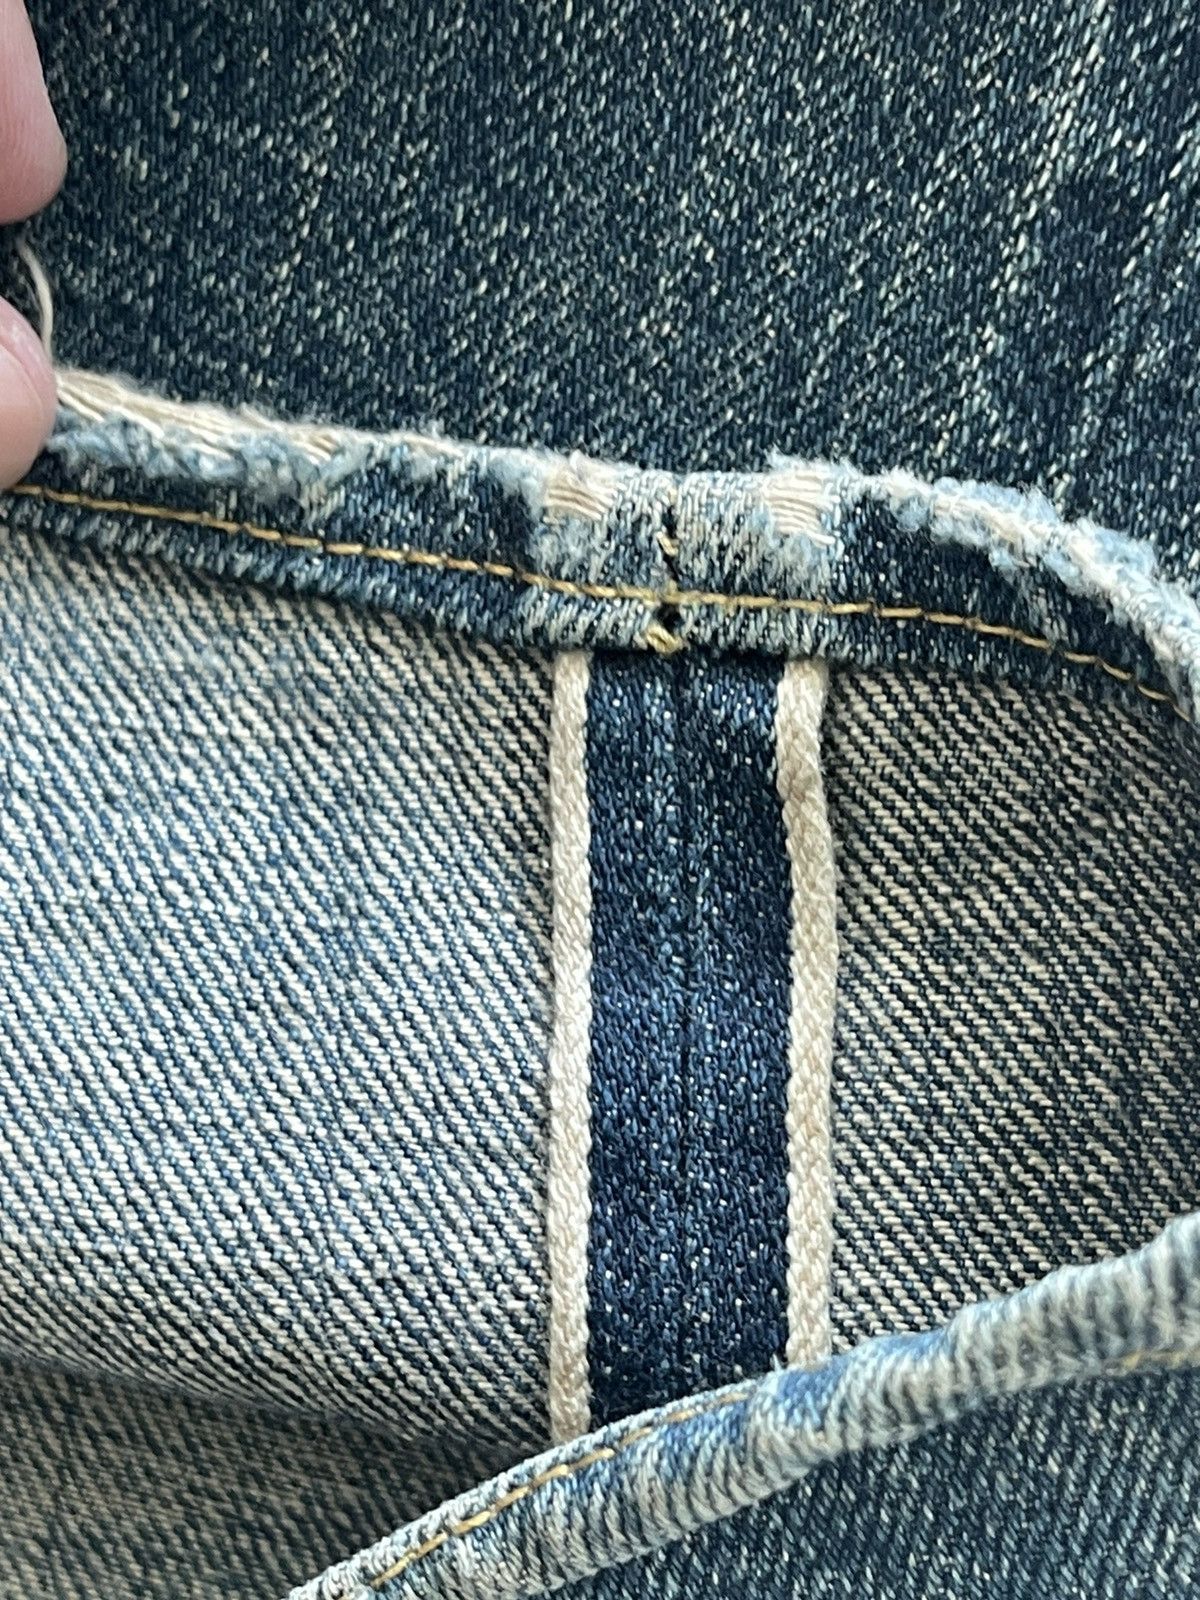 Japanese Brand - JAPANESE REPRO DENIM JEANS, BARNS OUTFITTERS & CO BRAND - 4